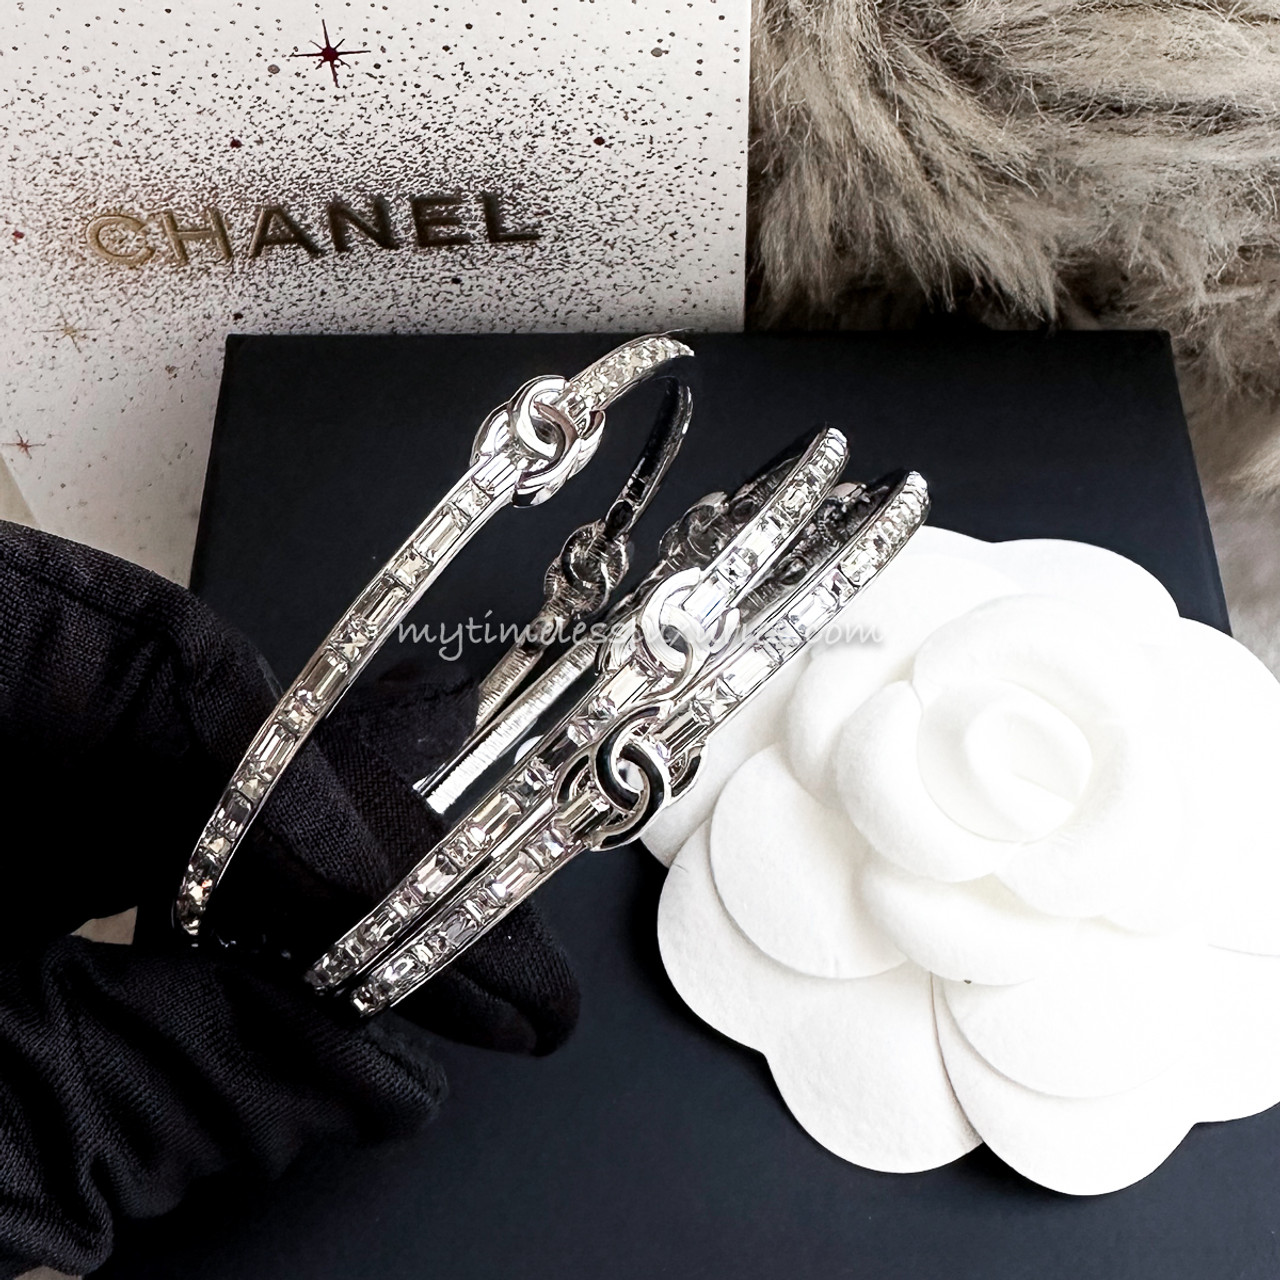 CHANEL relaxation luxuries set (1 available) – Eliteeyegifts